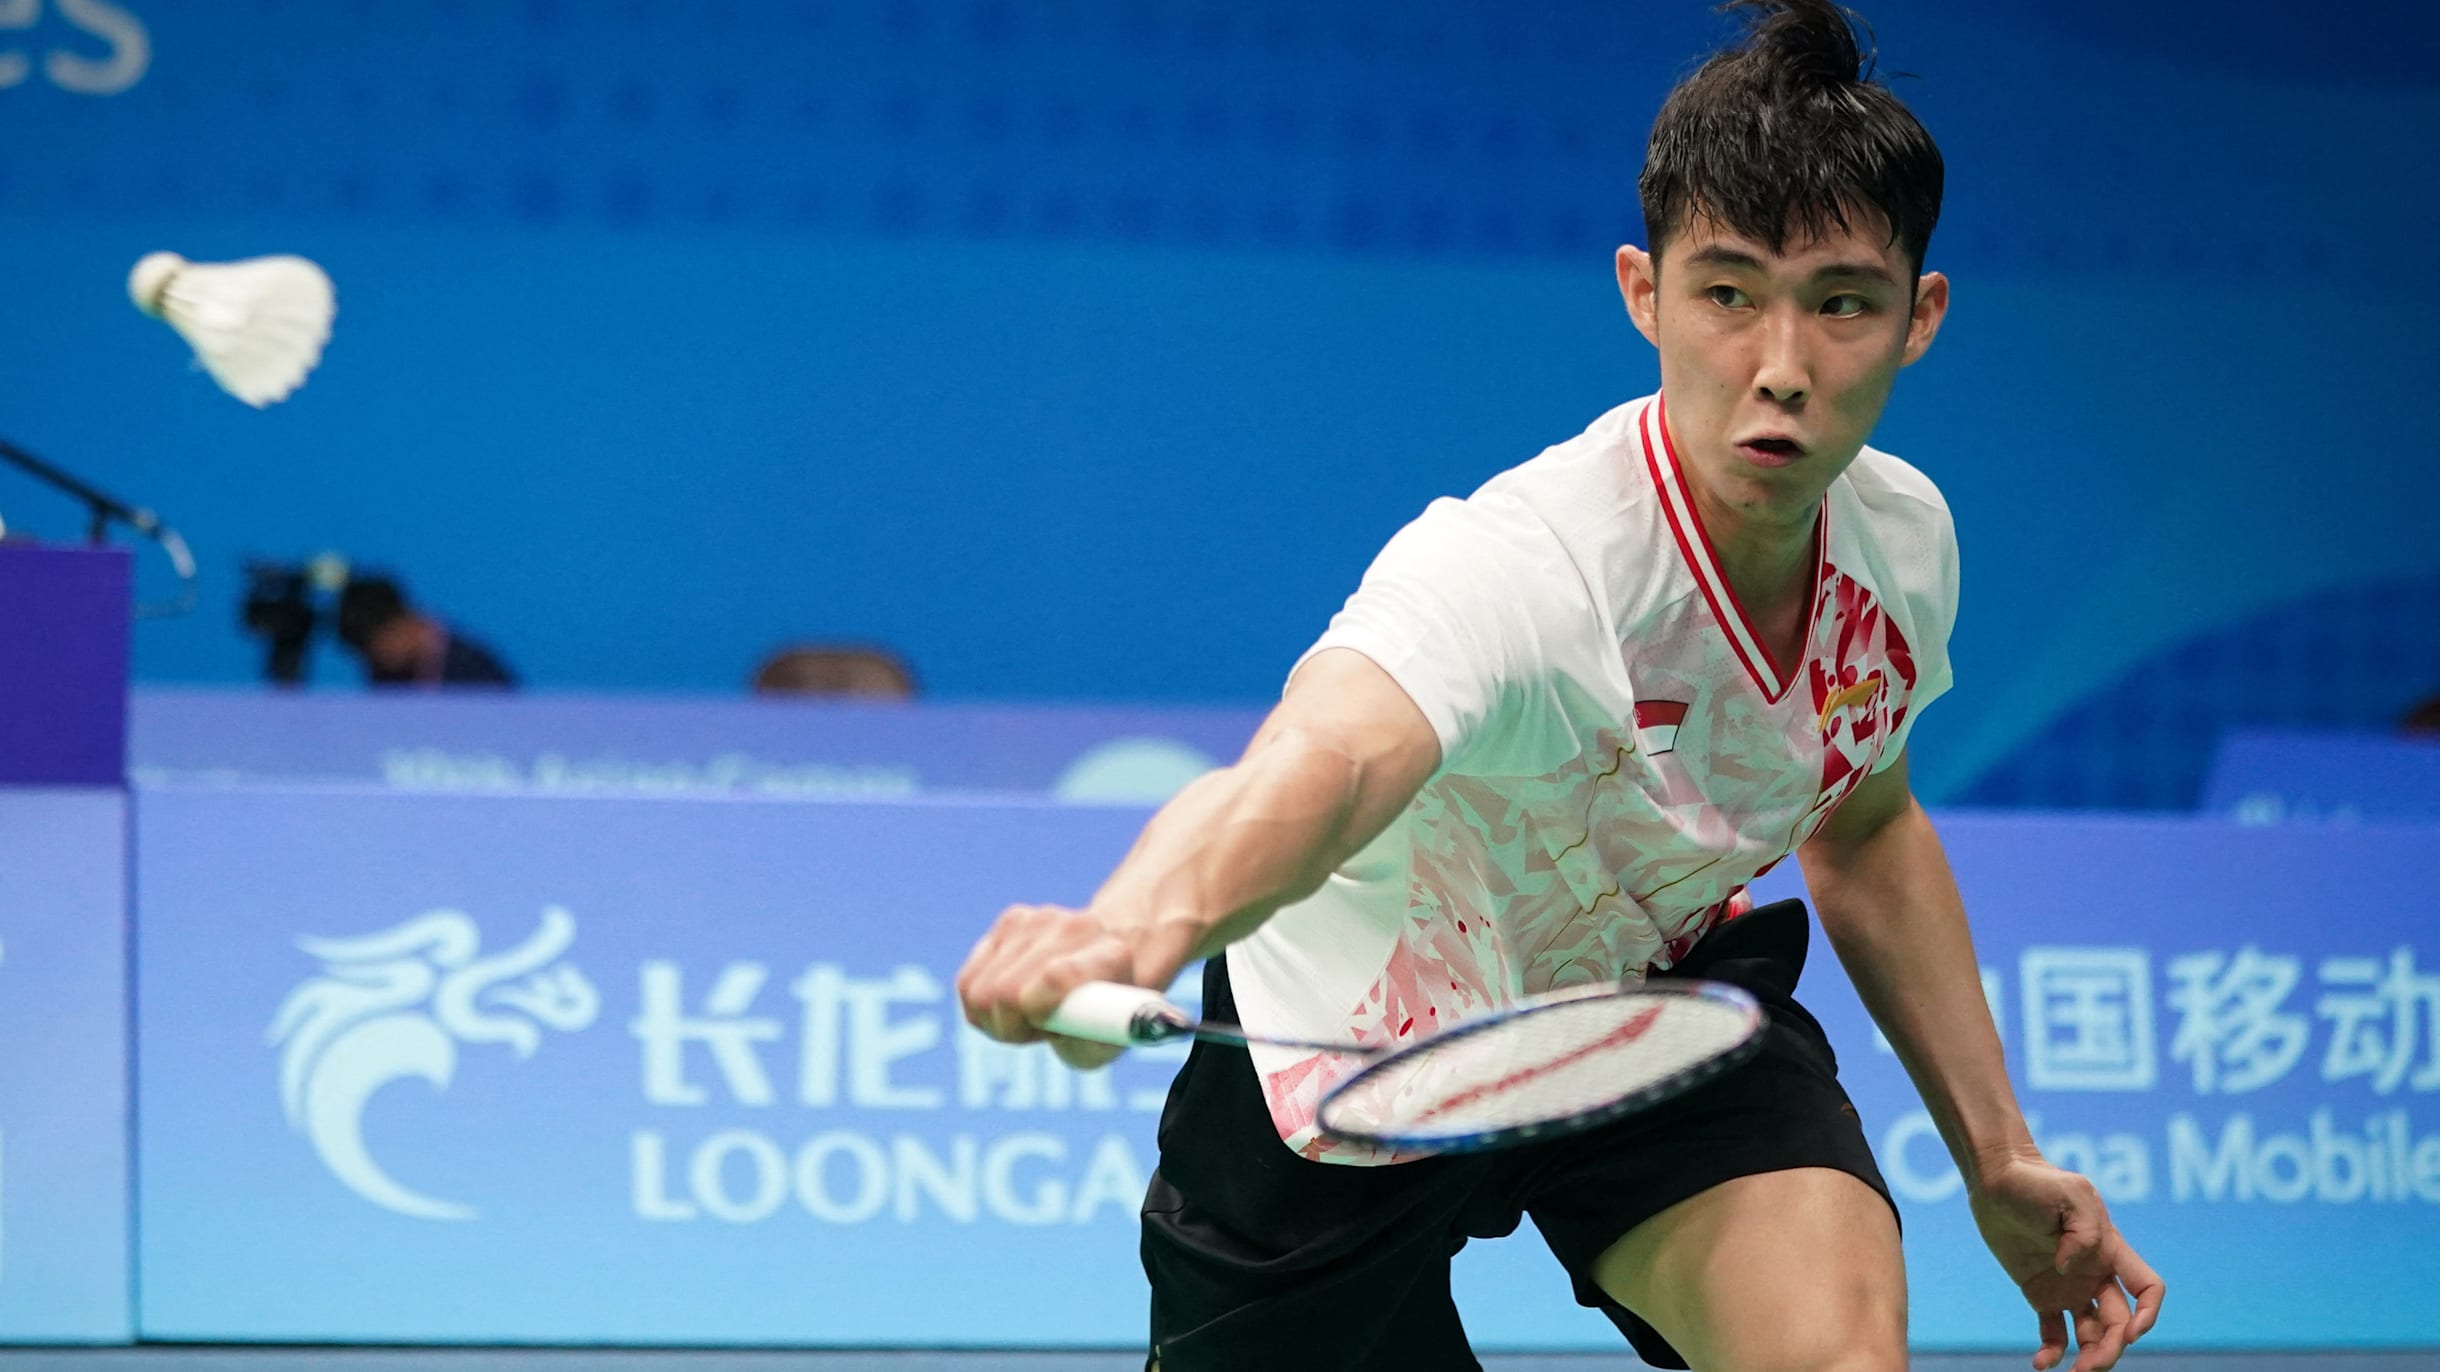 Asian Games badminton debutant Loh Kean Yew exclusive The challenges of dealing with fame and pressure